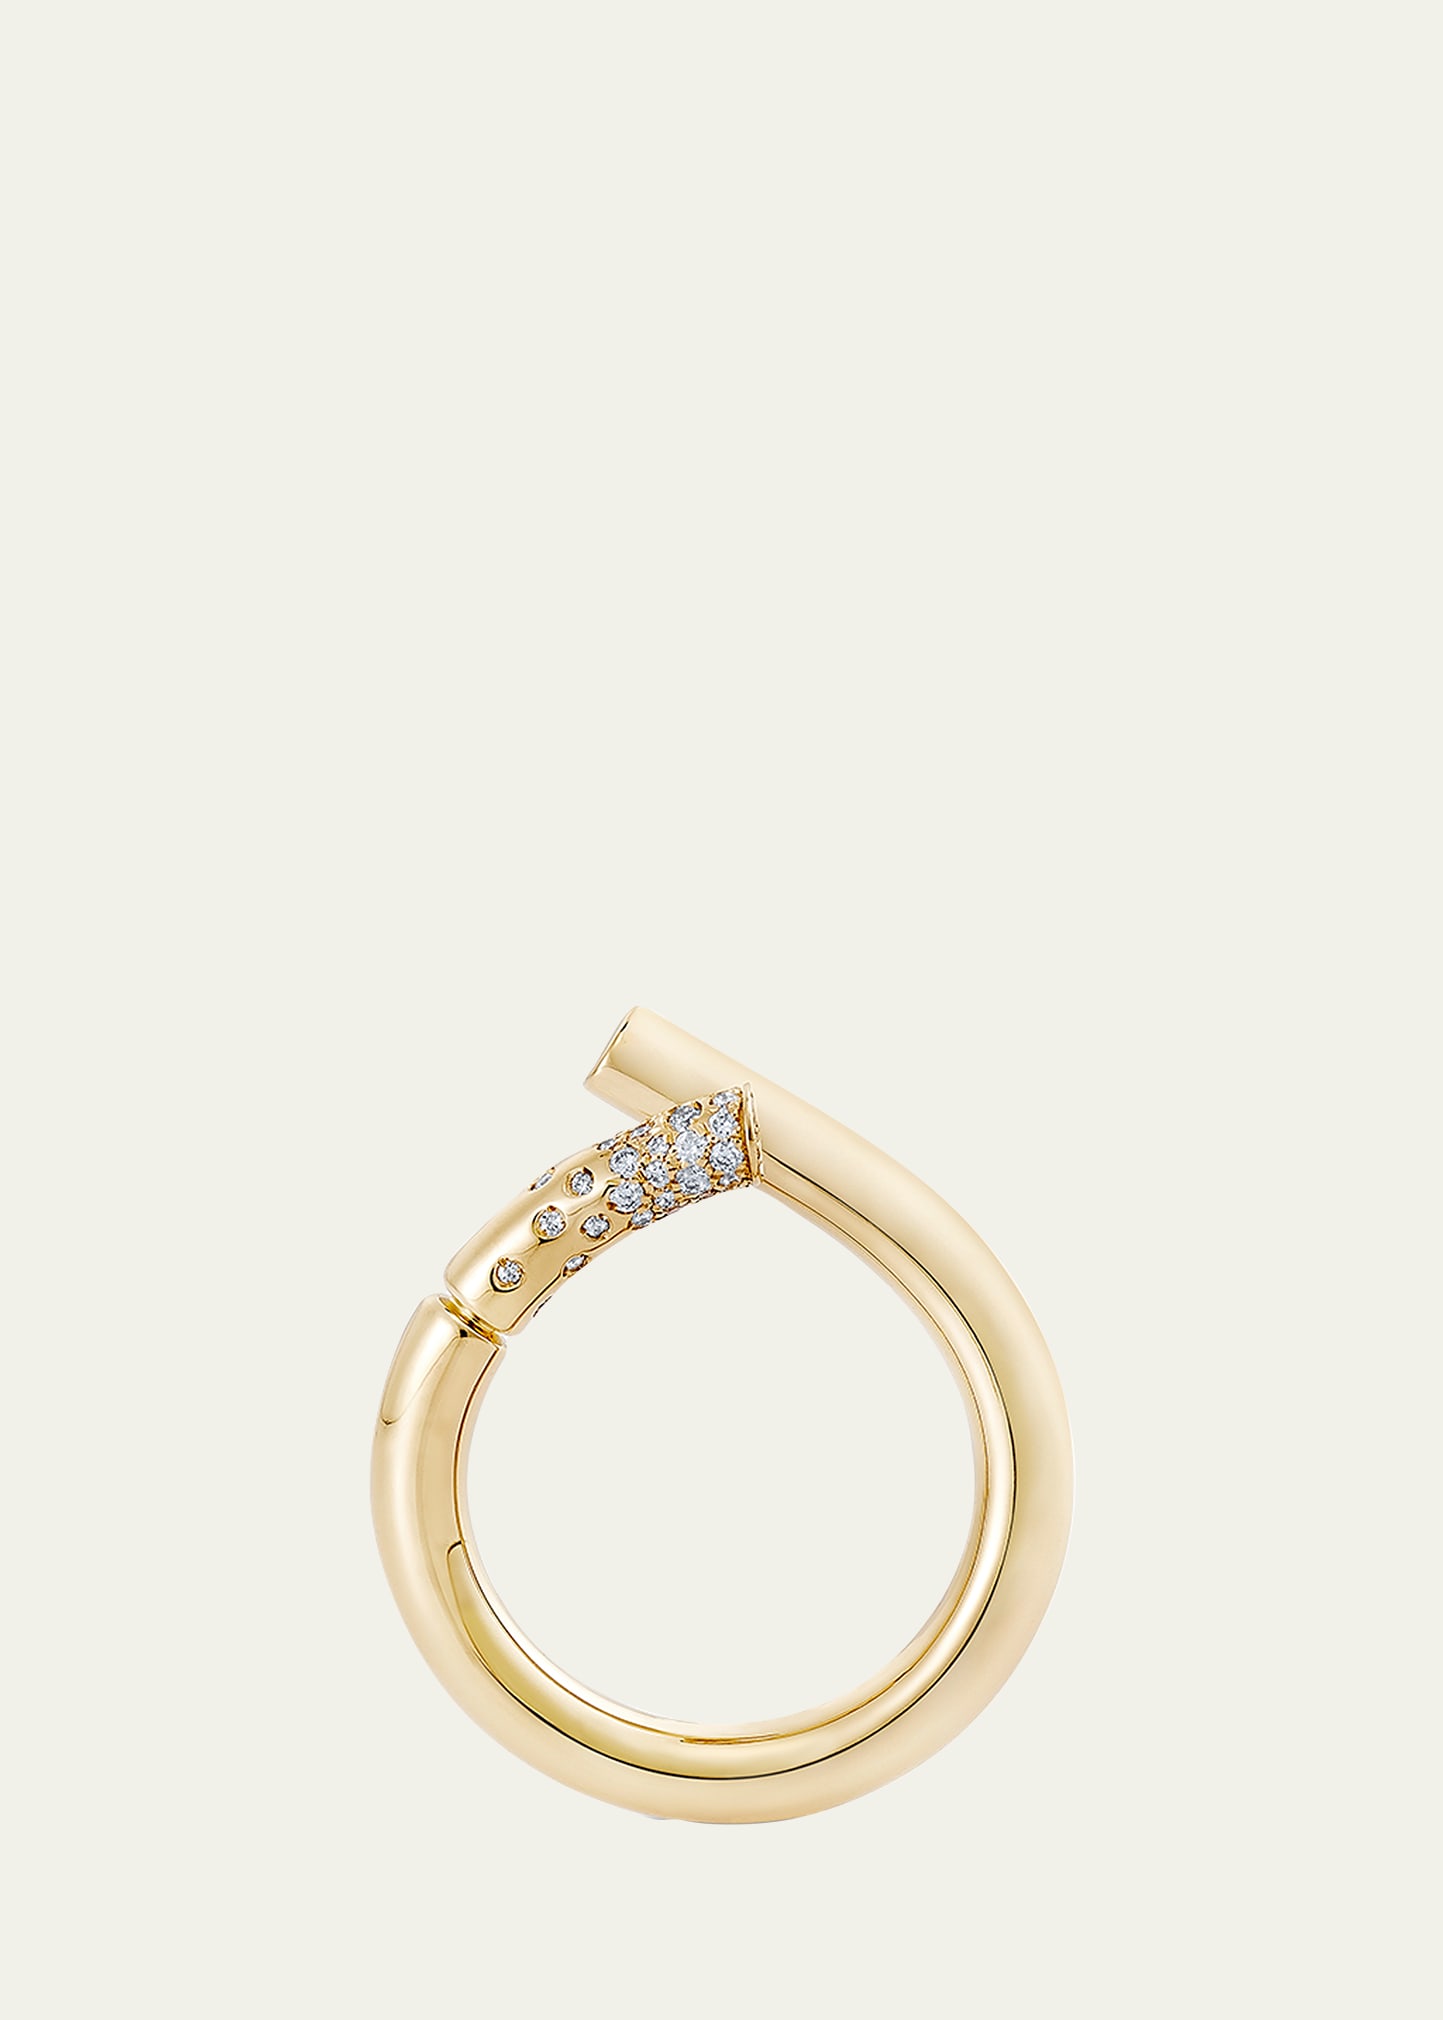 18k Fairmined Yellow Gold Oera Ring with Diamonds, Size 53